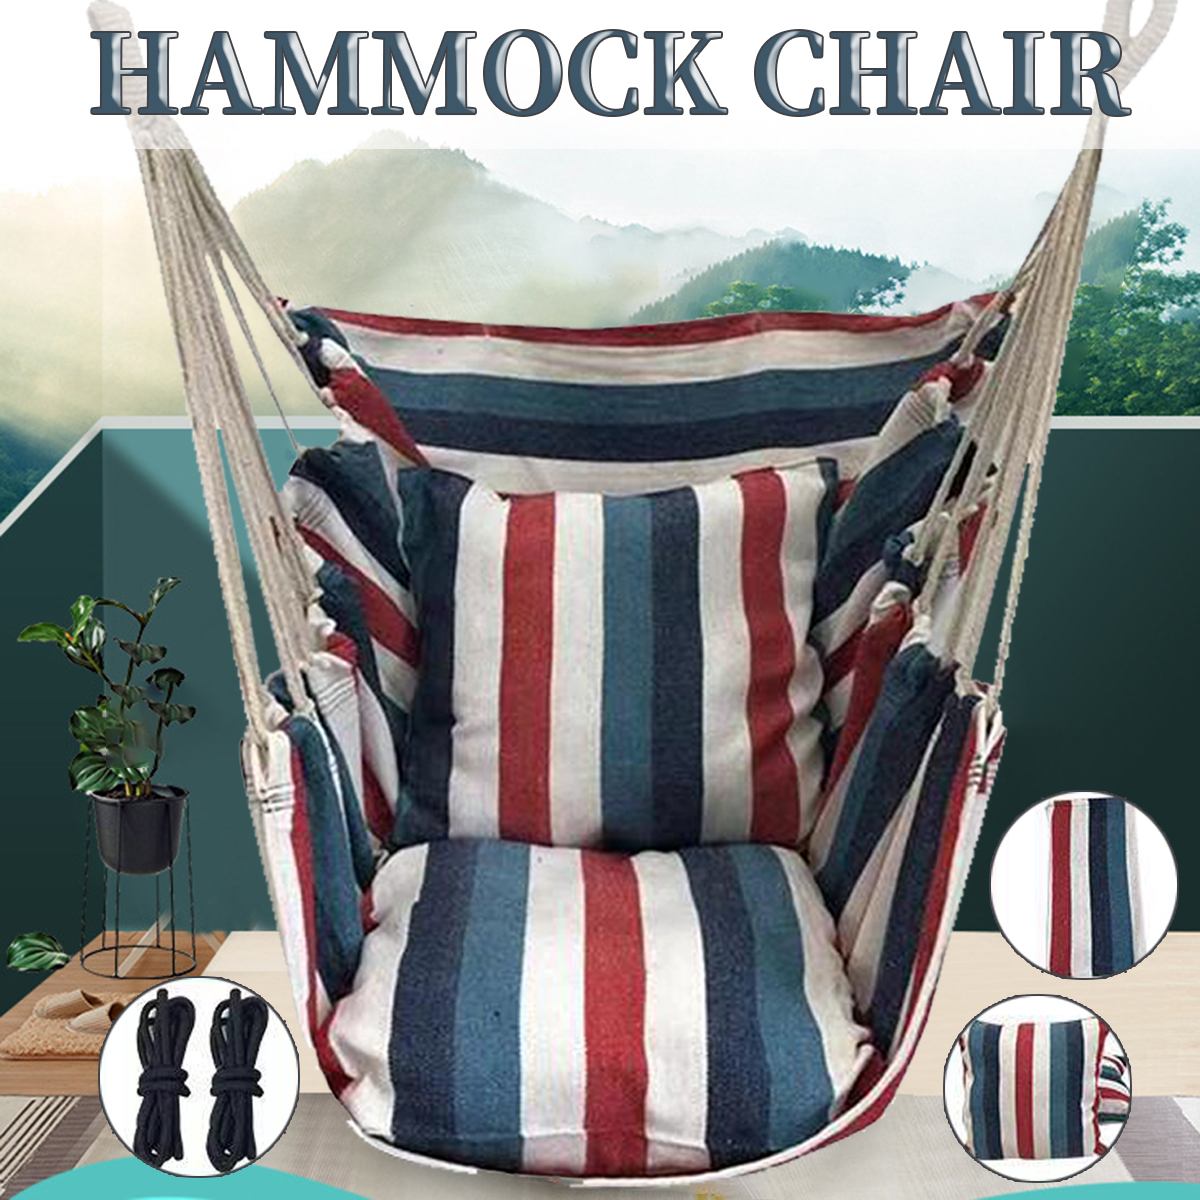 39x51in-Hammock-Chair-Comfortable-Easy-Install-Hanging-Swing-Seat-with-2-Pillow-Outdoor-Indoor-Campi-1731884-1